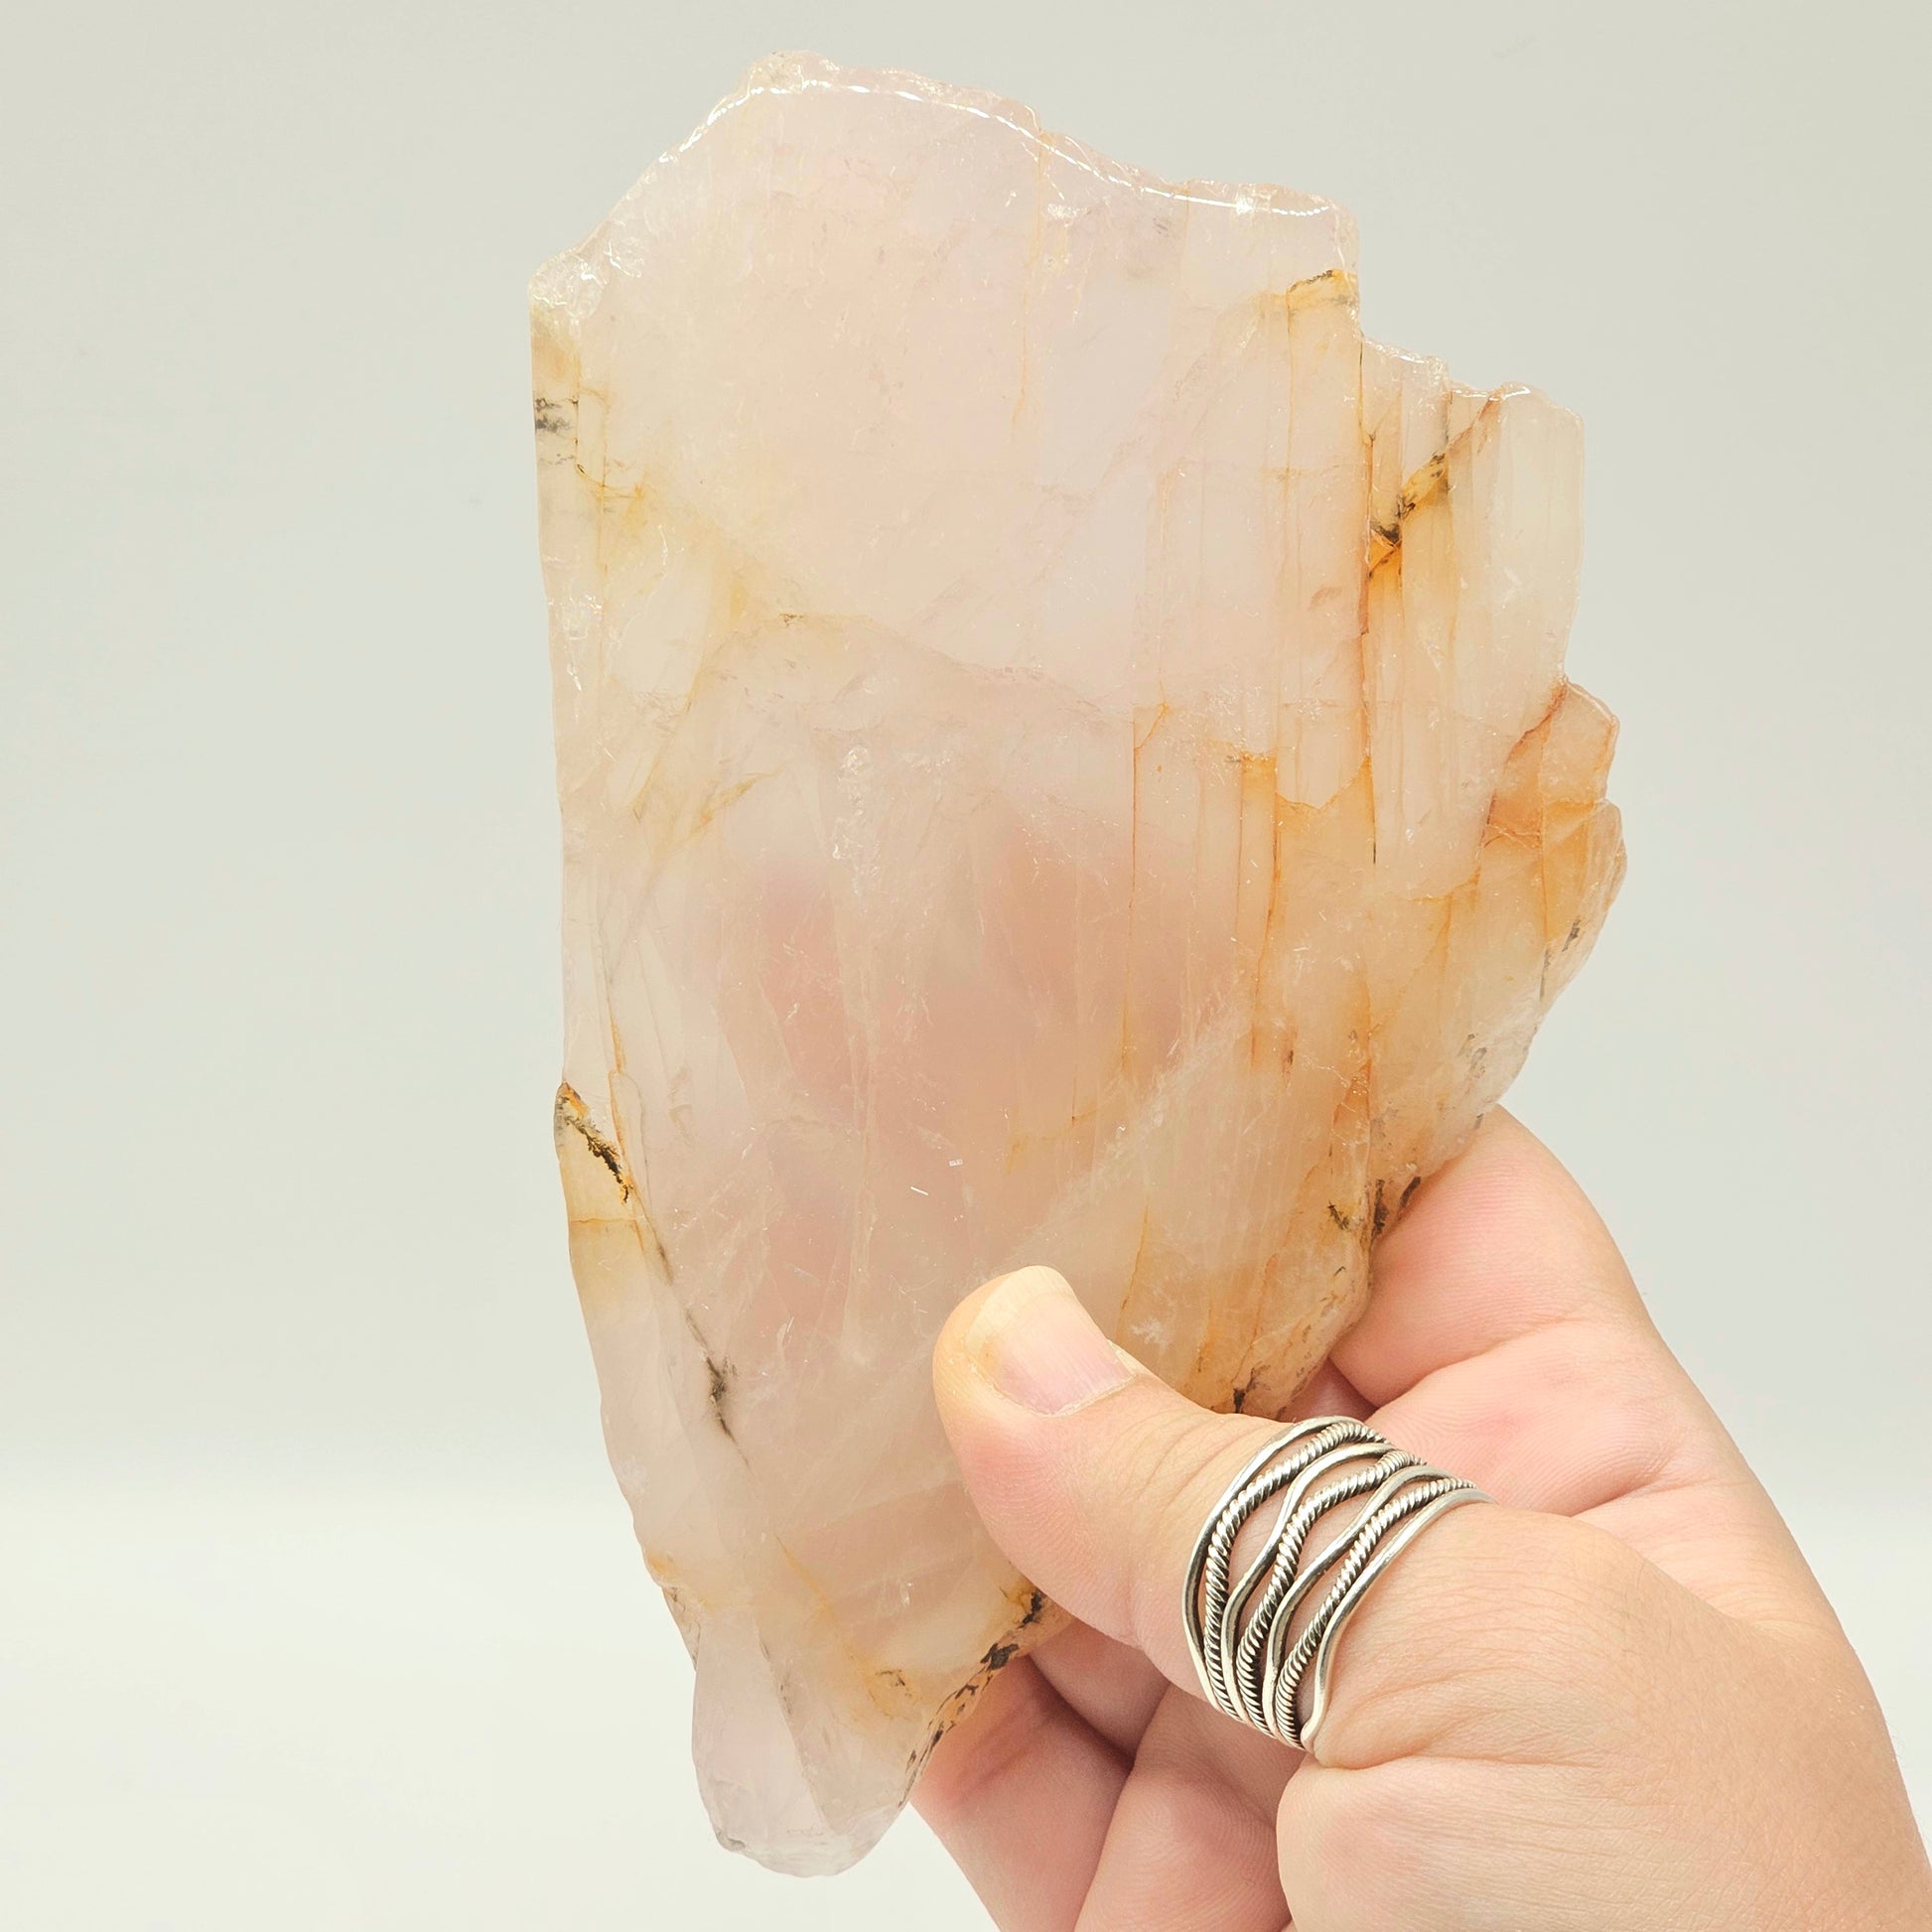 High quality Rose Quartz slab from Mozambique with dendritic inclusions and rainbows.